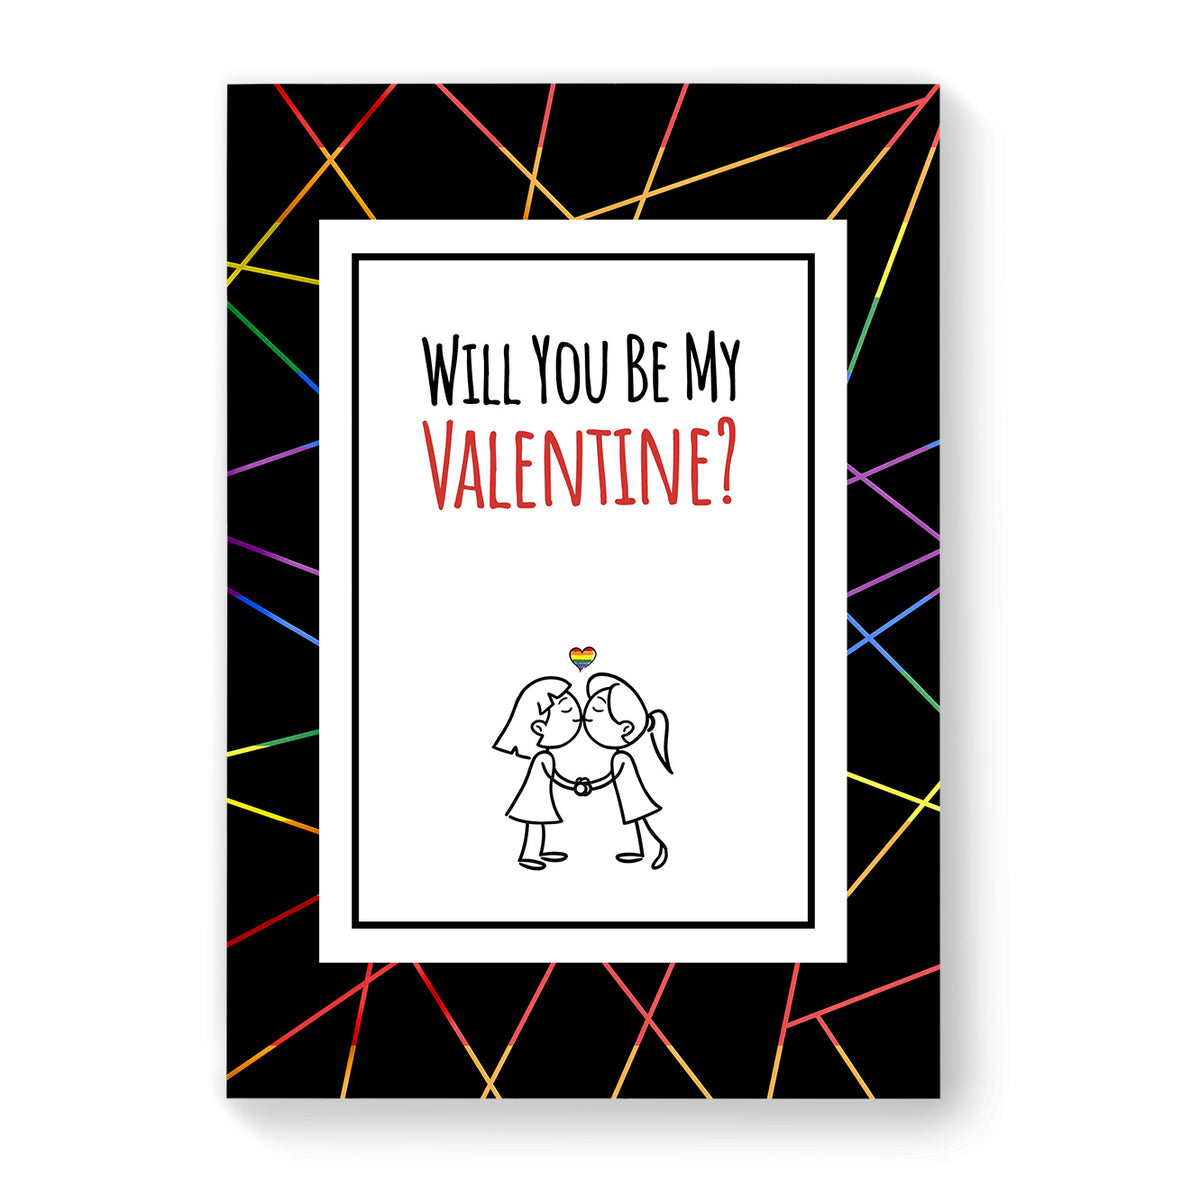 Will you be my Valentine - Lesbian Gay Couple Card - Black Geometric | Gift